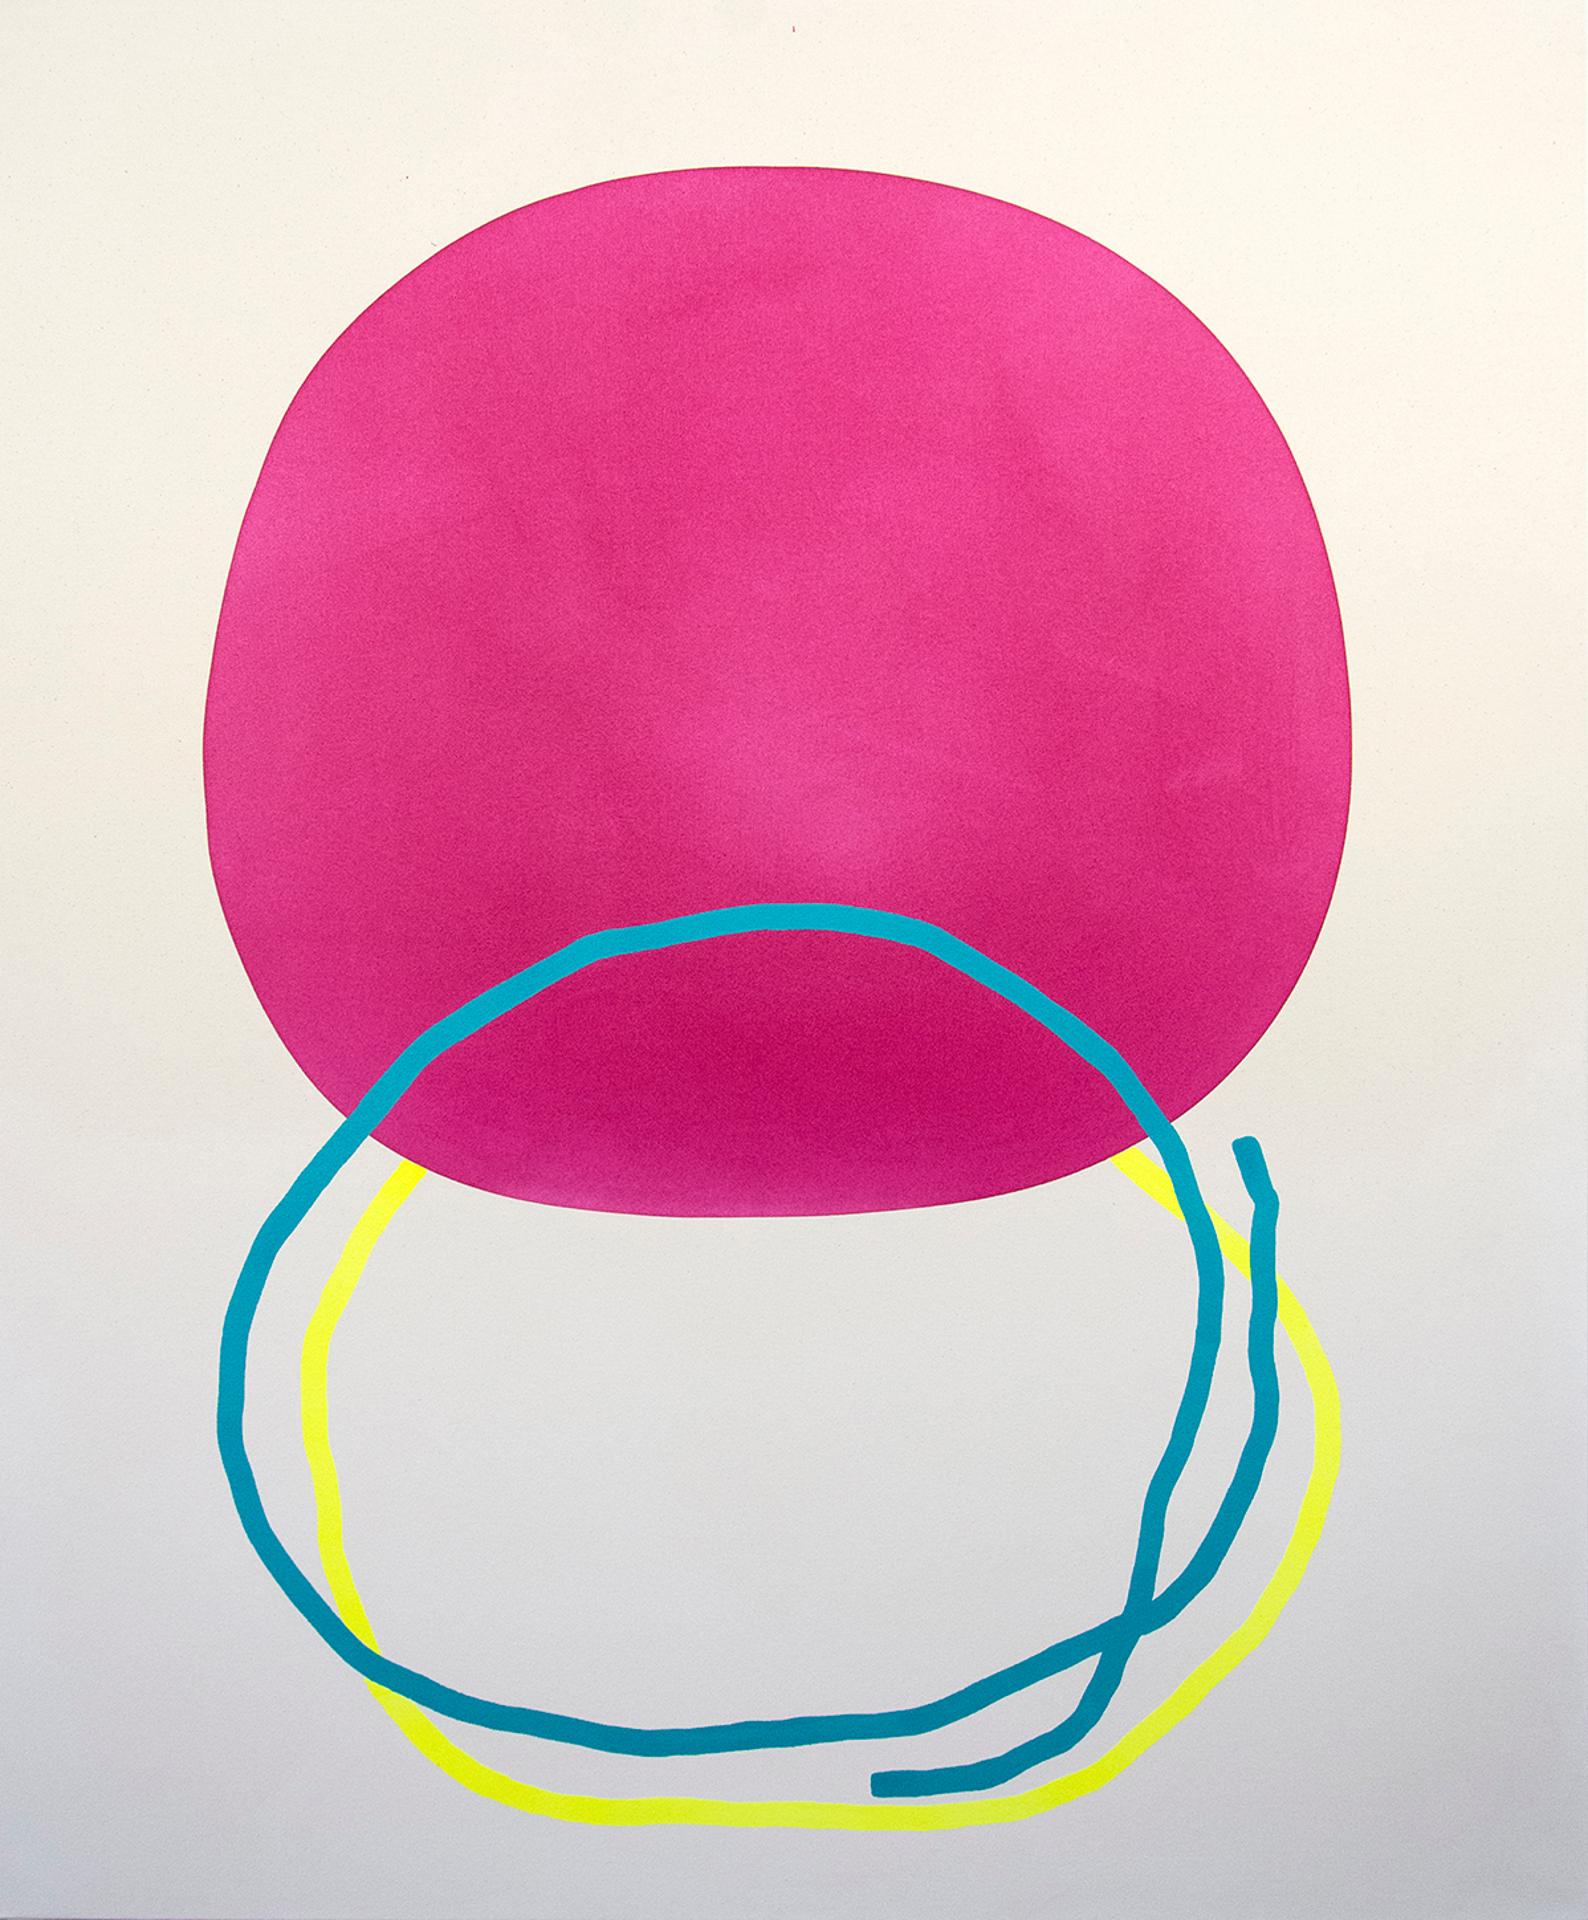 Aron Hill - Magenta Circle with Blue and Yellow Lines, 2019